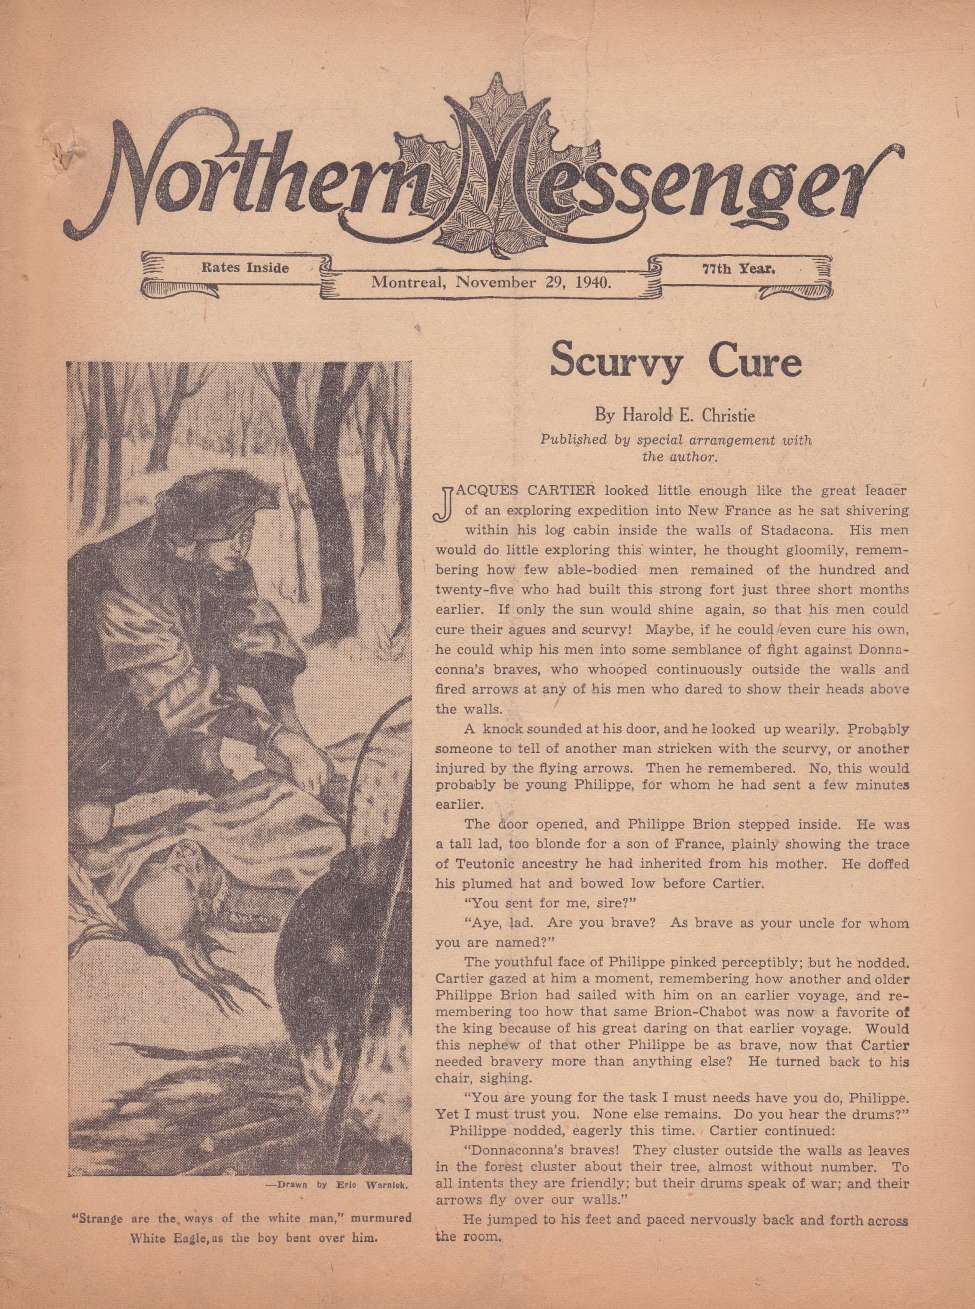 Comic Book Cover For Northern Messenger (1940-11-29)